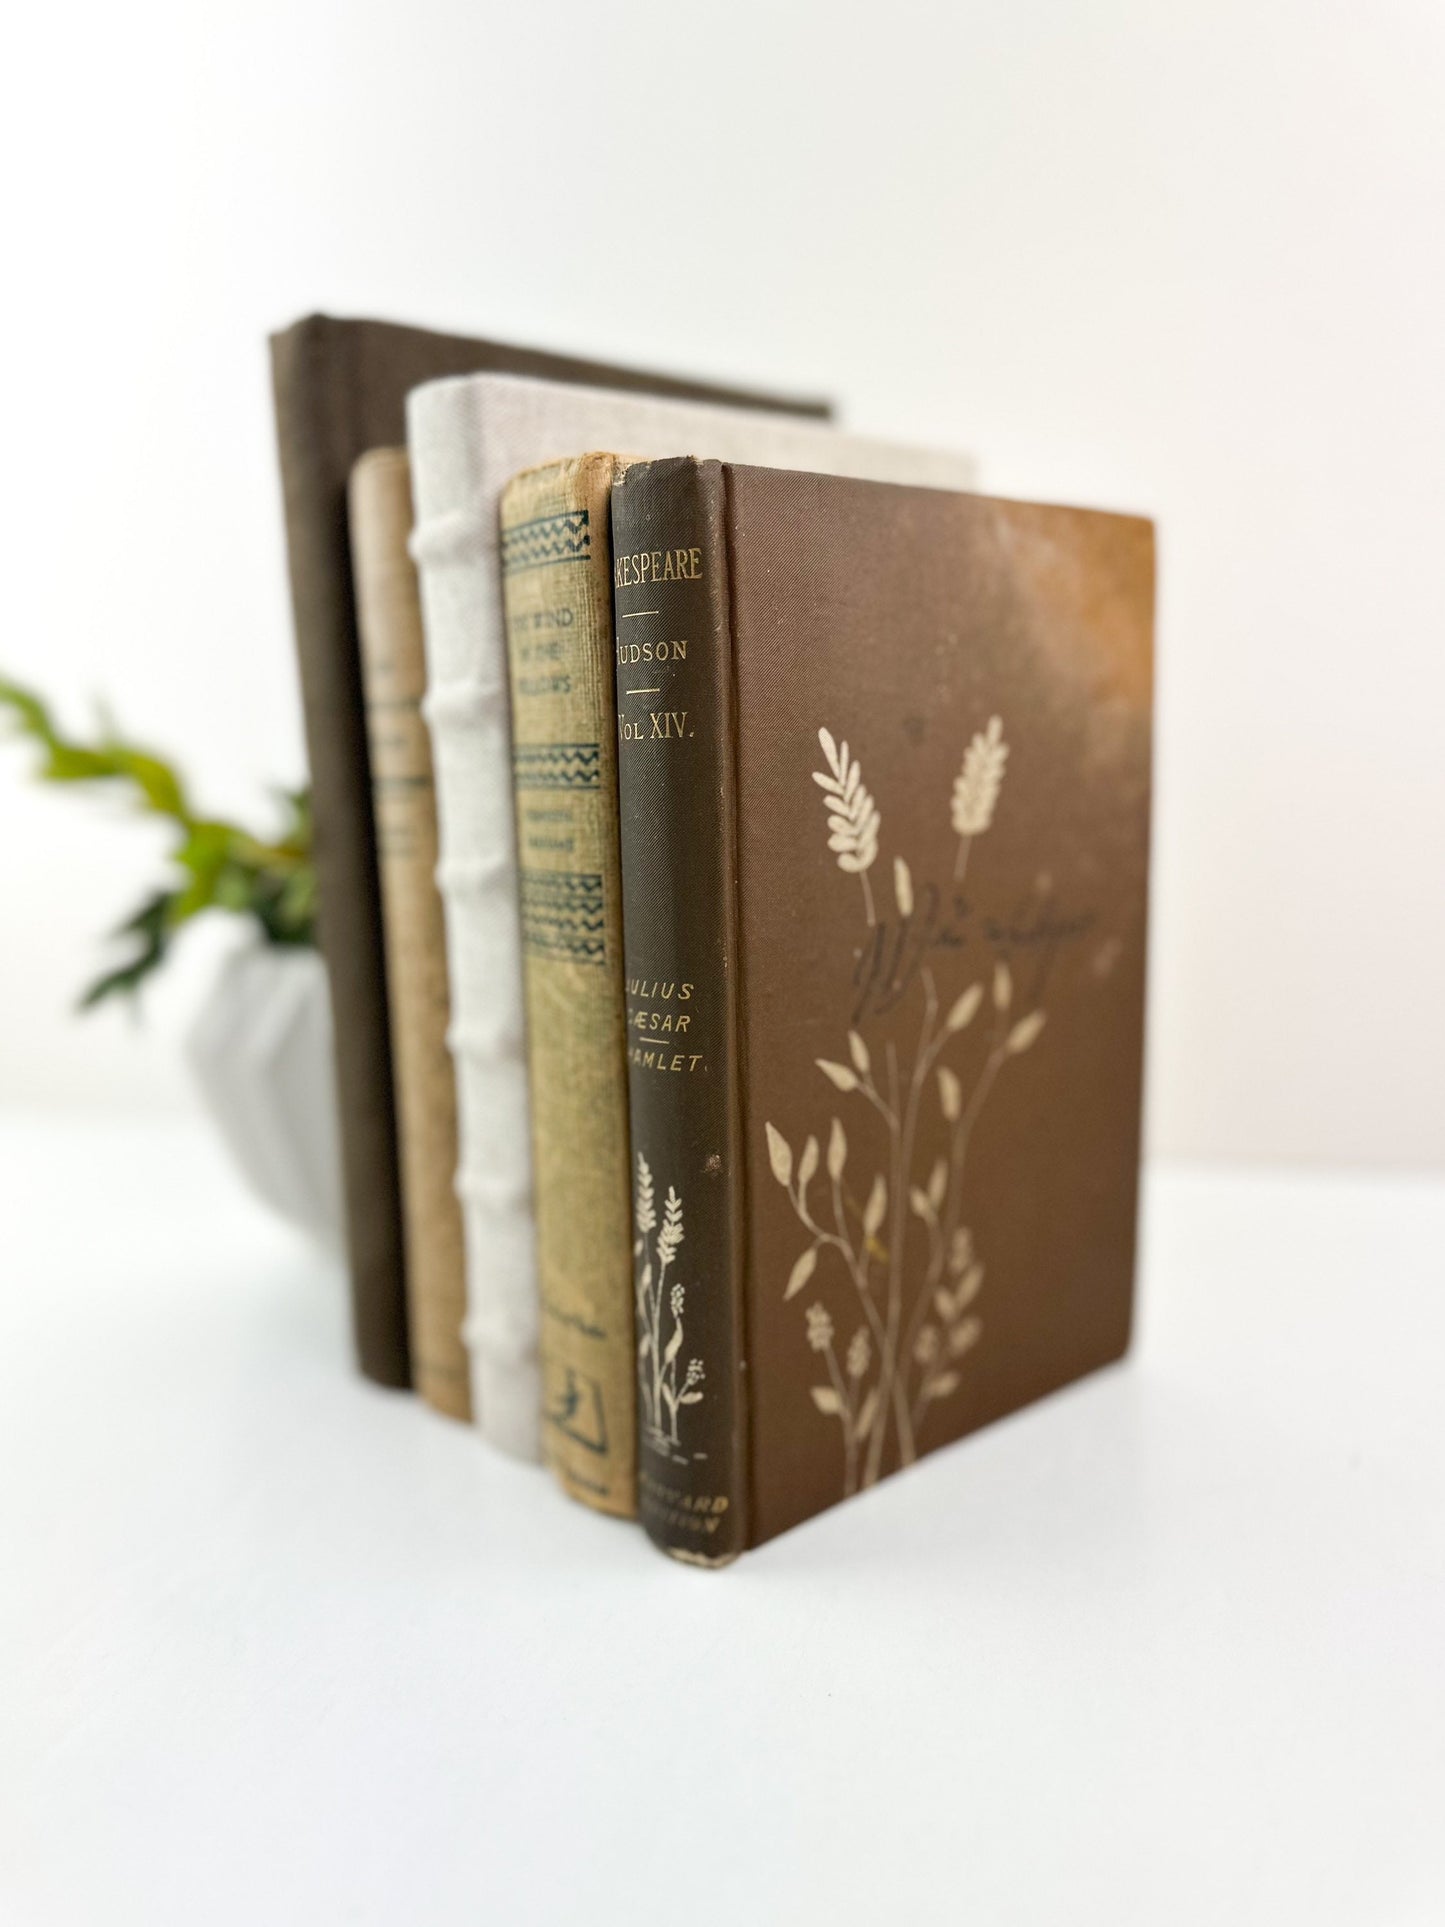 Brown Decorative Books for Home Decor, Books by Color, Books by the Foot, Shelf Decor